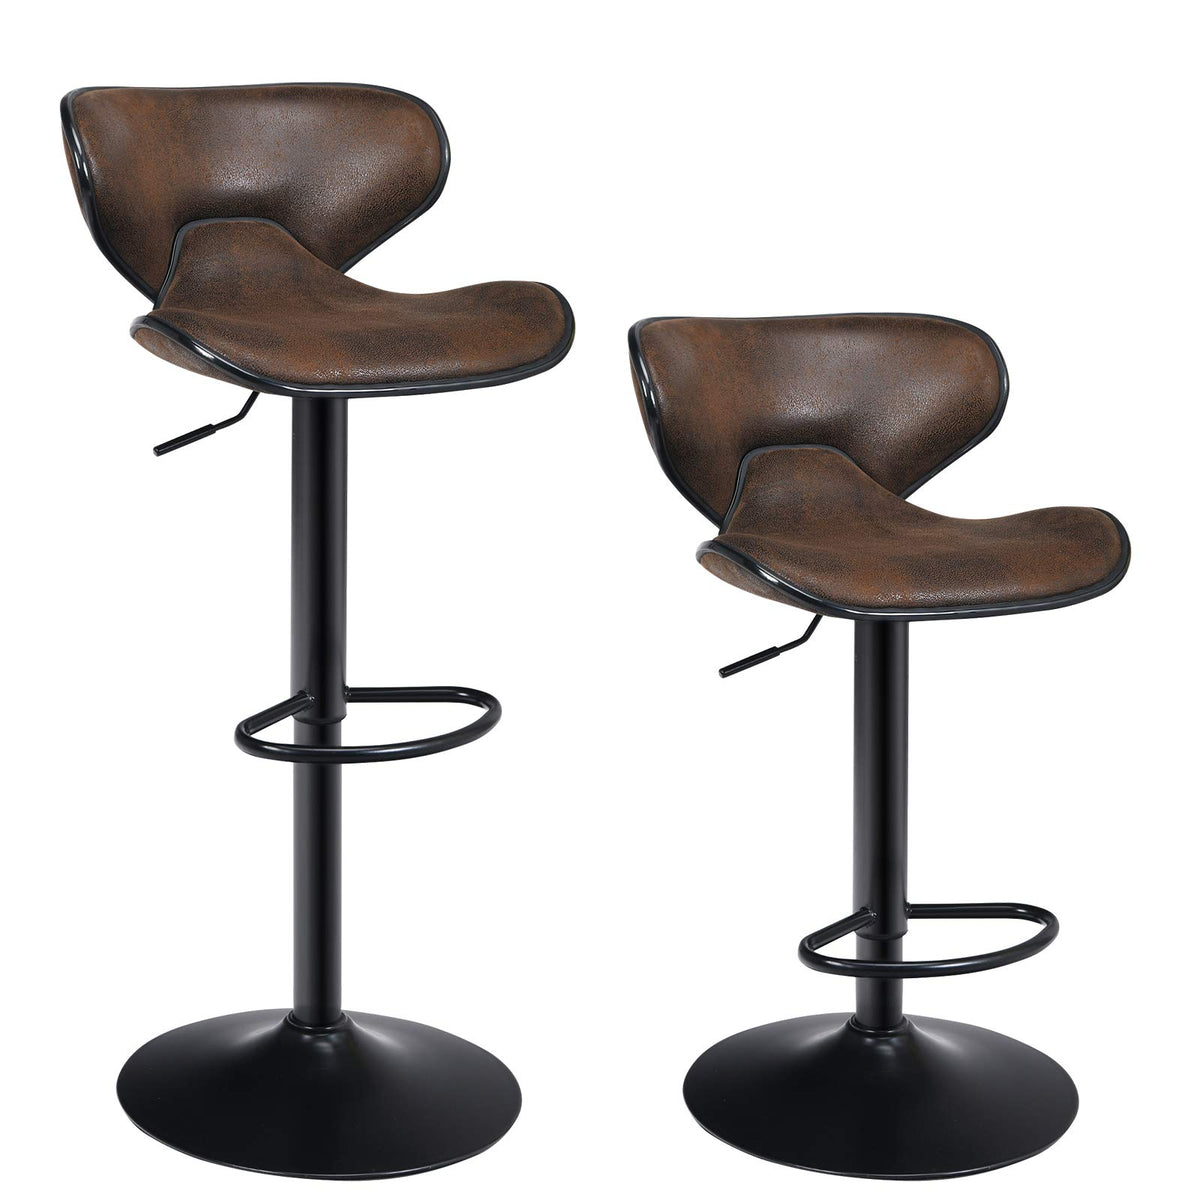 Giantex Bar Stools Set of 2, Swivel Counter Chairs with Backrest, Footrest & Larger Base, Retro Brown